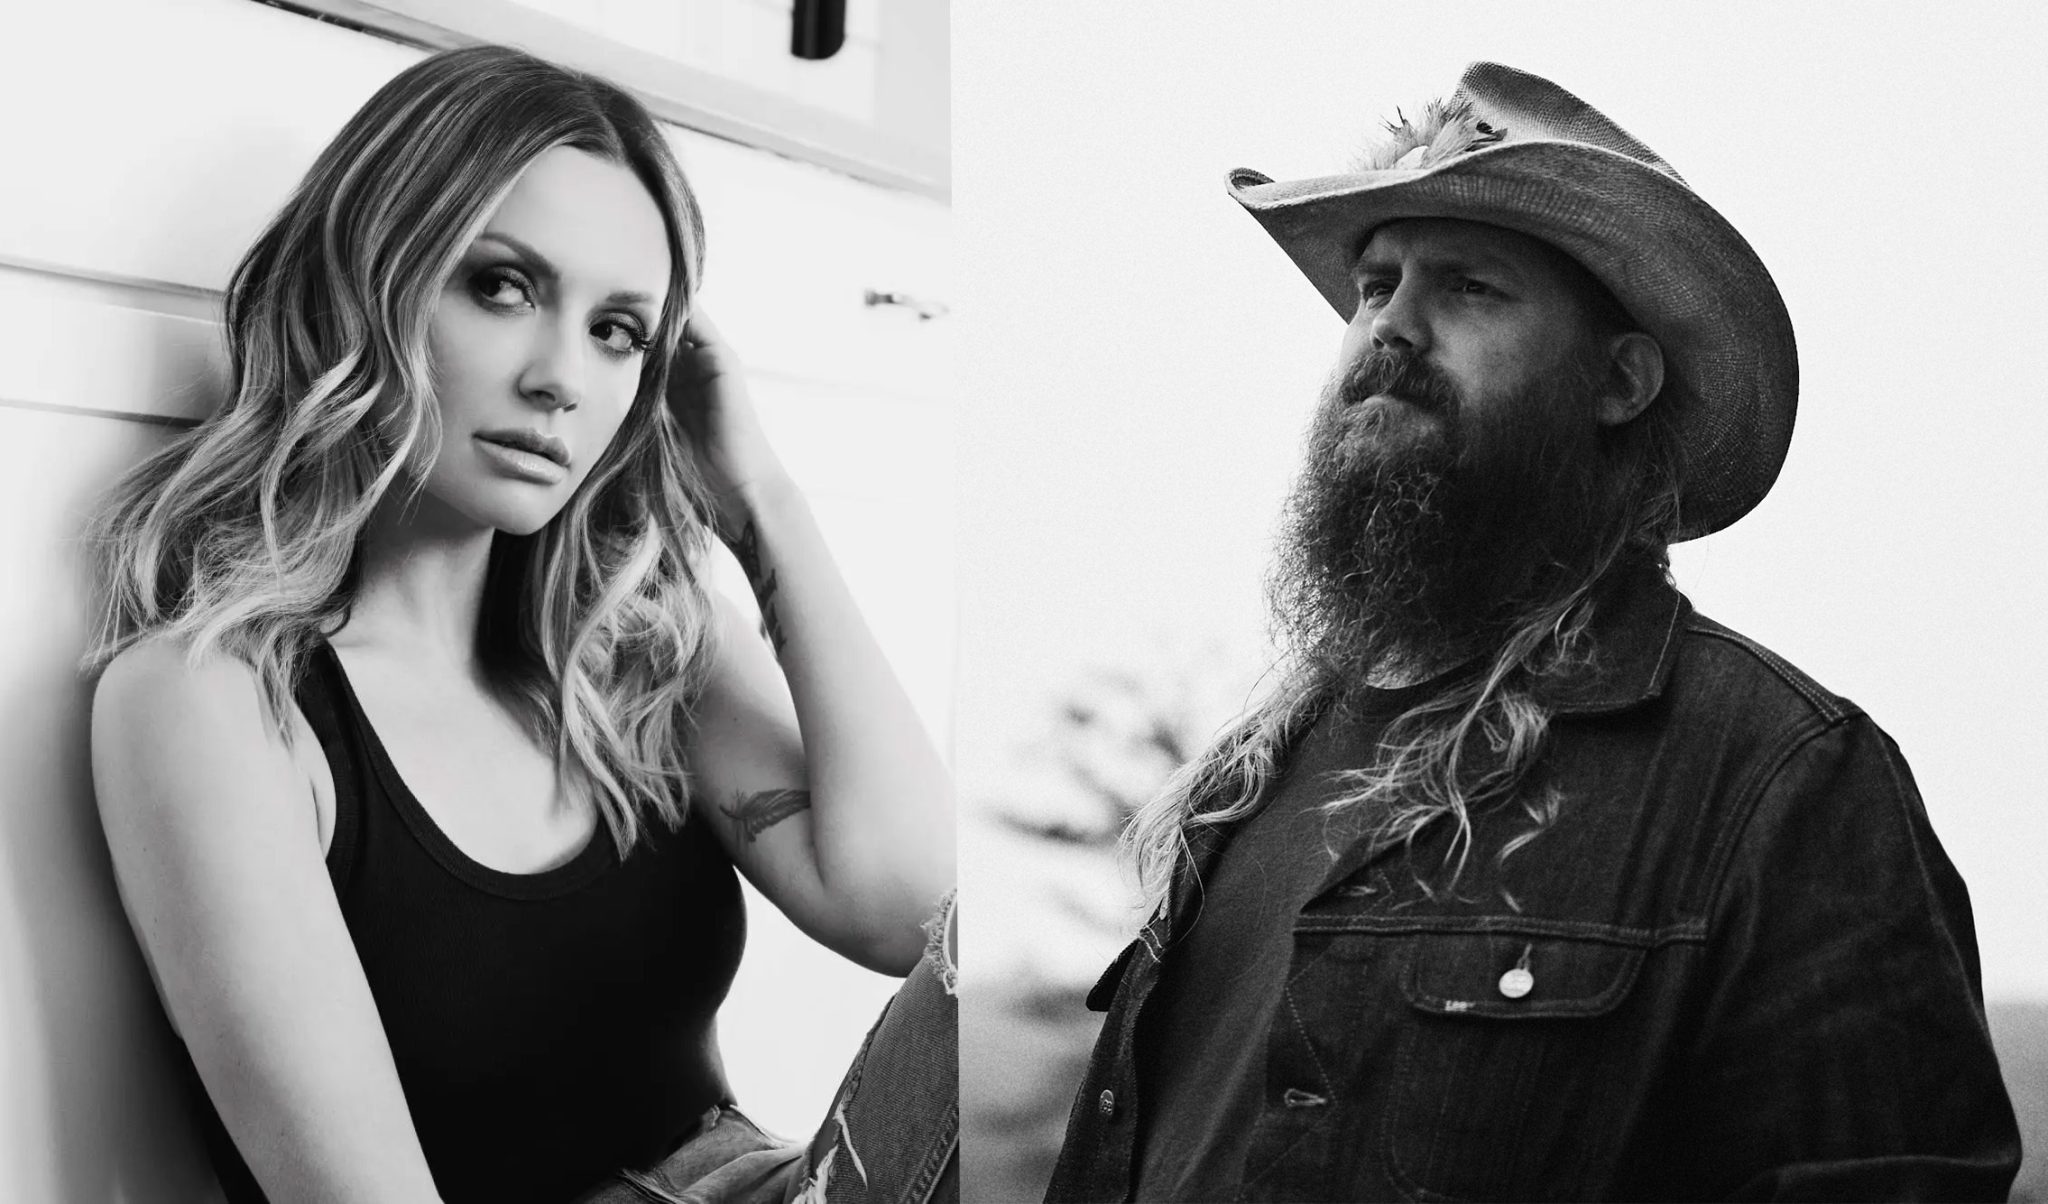 Carly Pearce Announces Brand New Song With Chris Stapleton, "We Don't